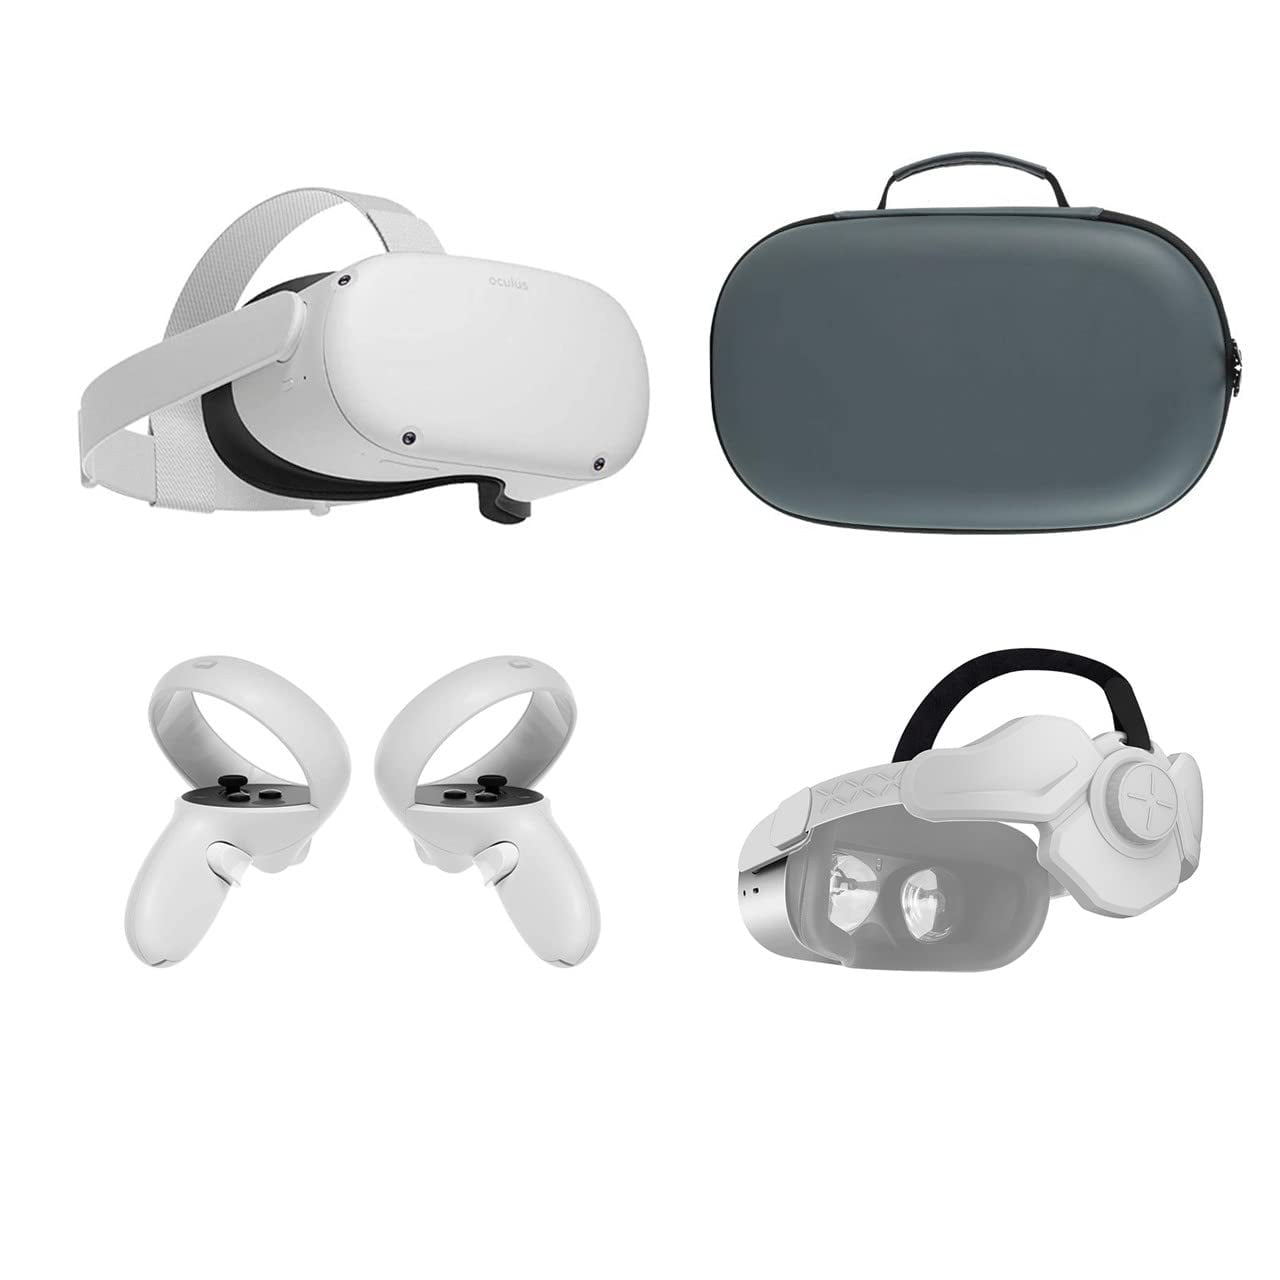 Oculus Quest 2 — Advanced All-In-One Virtual Reality Headset 